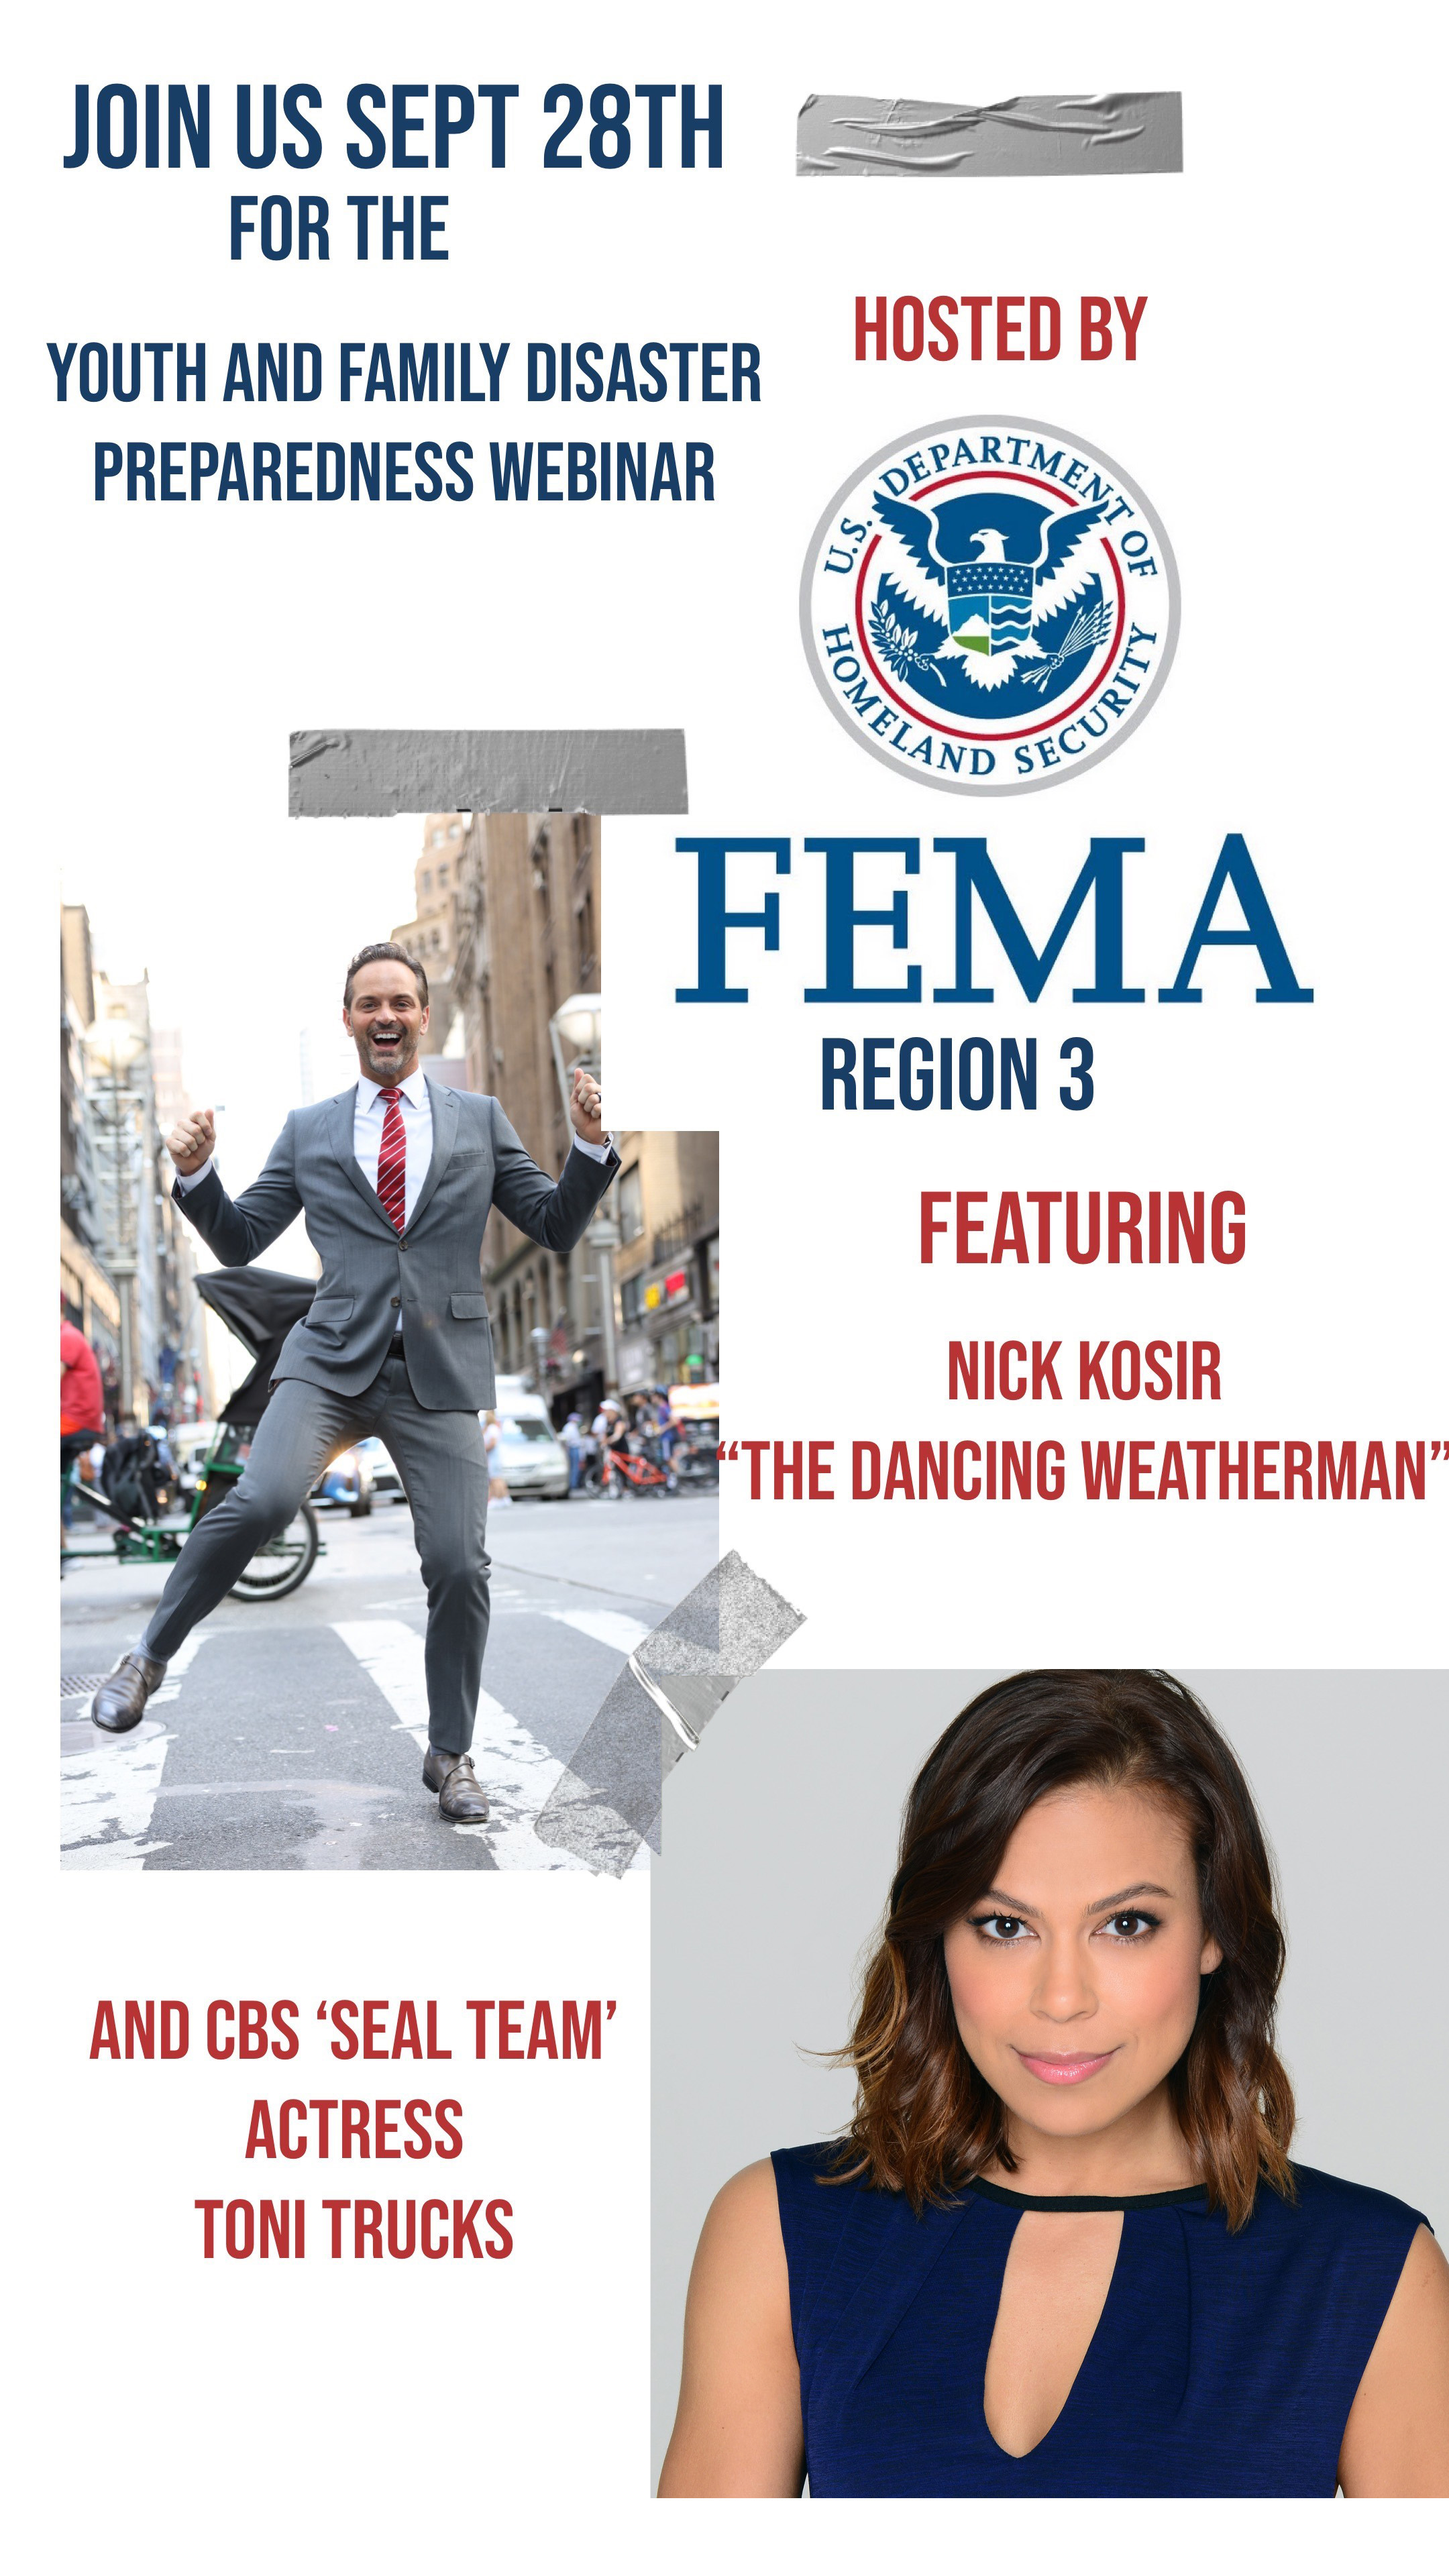 Join us Sept. 28th for the Youth & Family Preparedness Webinar Hosted By FEMA Region 3 Featuring Nick Kosir the Dancing Weatherman and Toni Trucks, Actress. 